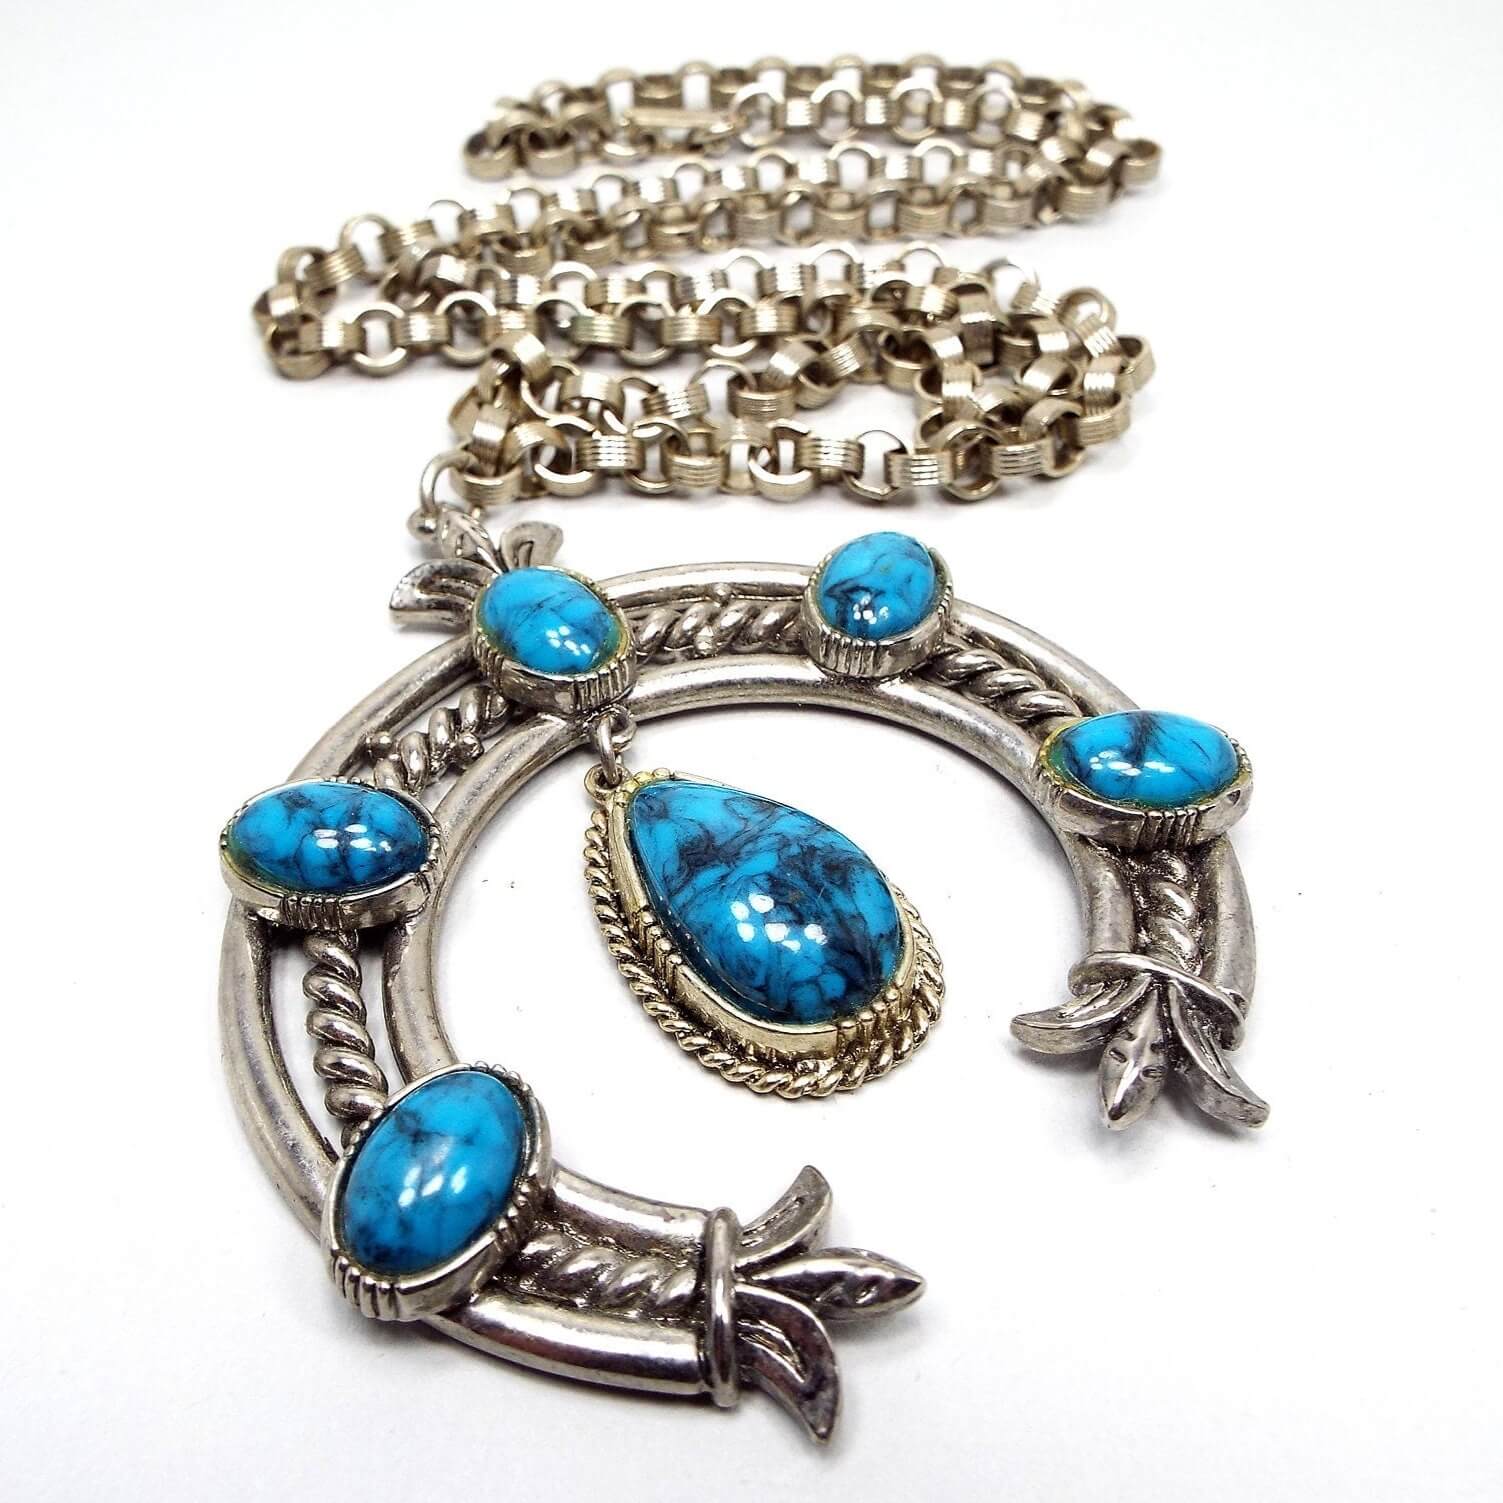 Front view of the retro vintage ART squash blossom pendant necklace. The metal is silver tone in color. The pendant has a large curved squash blossom design with oval blue and gray marbled plastic cabs. 